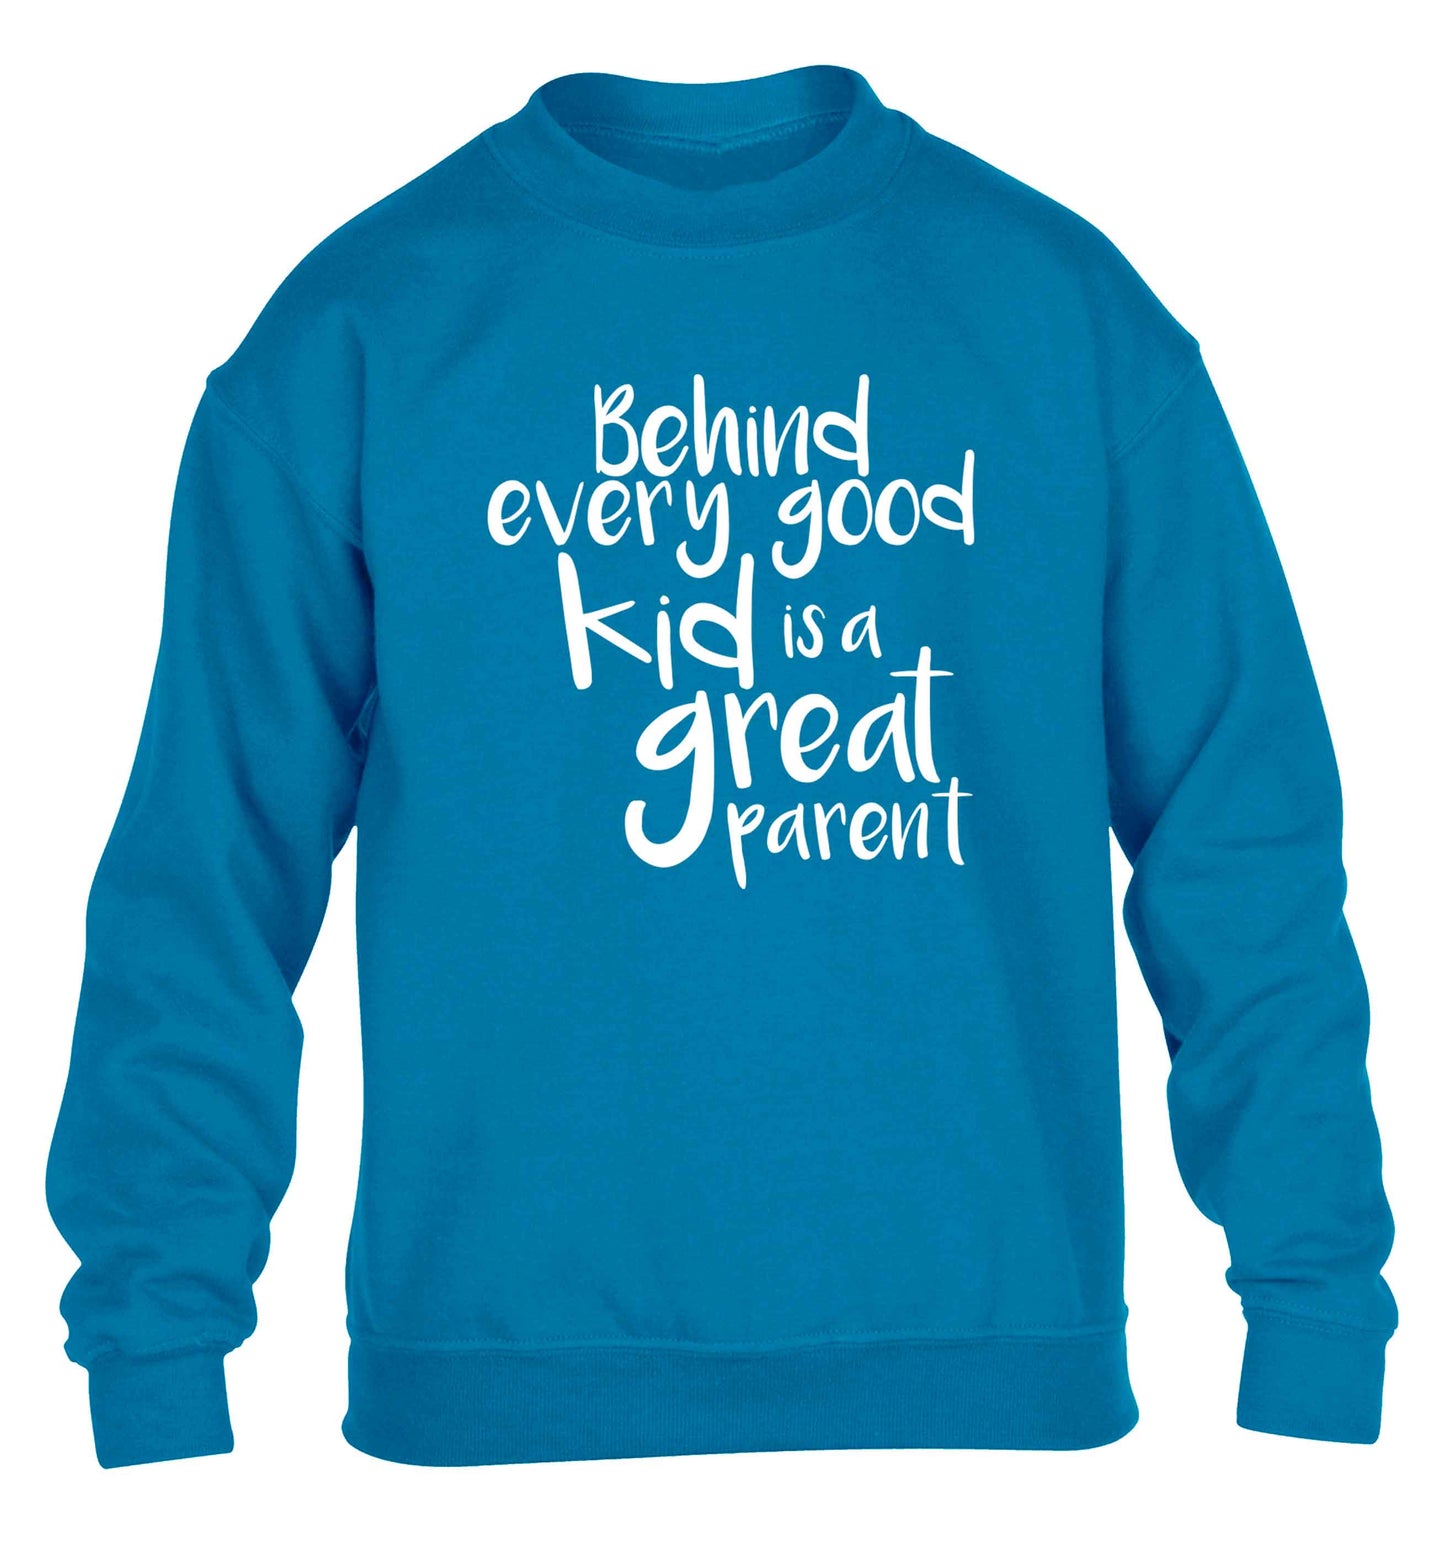 Behind every good kid is a great parent children's blue sweater 12-13 Years